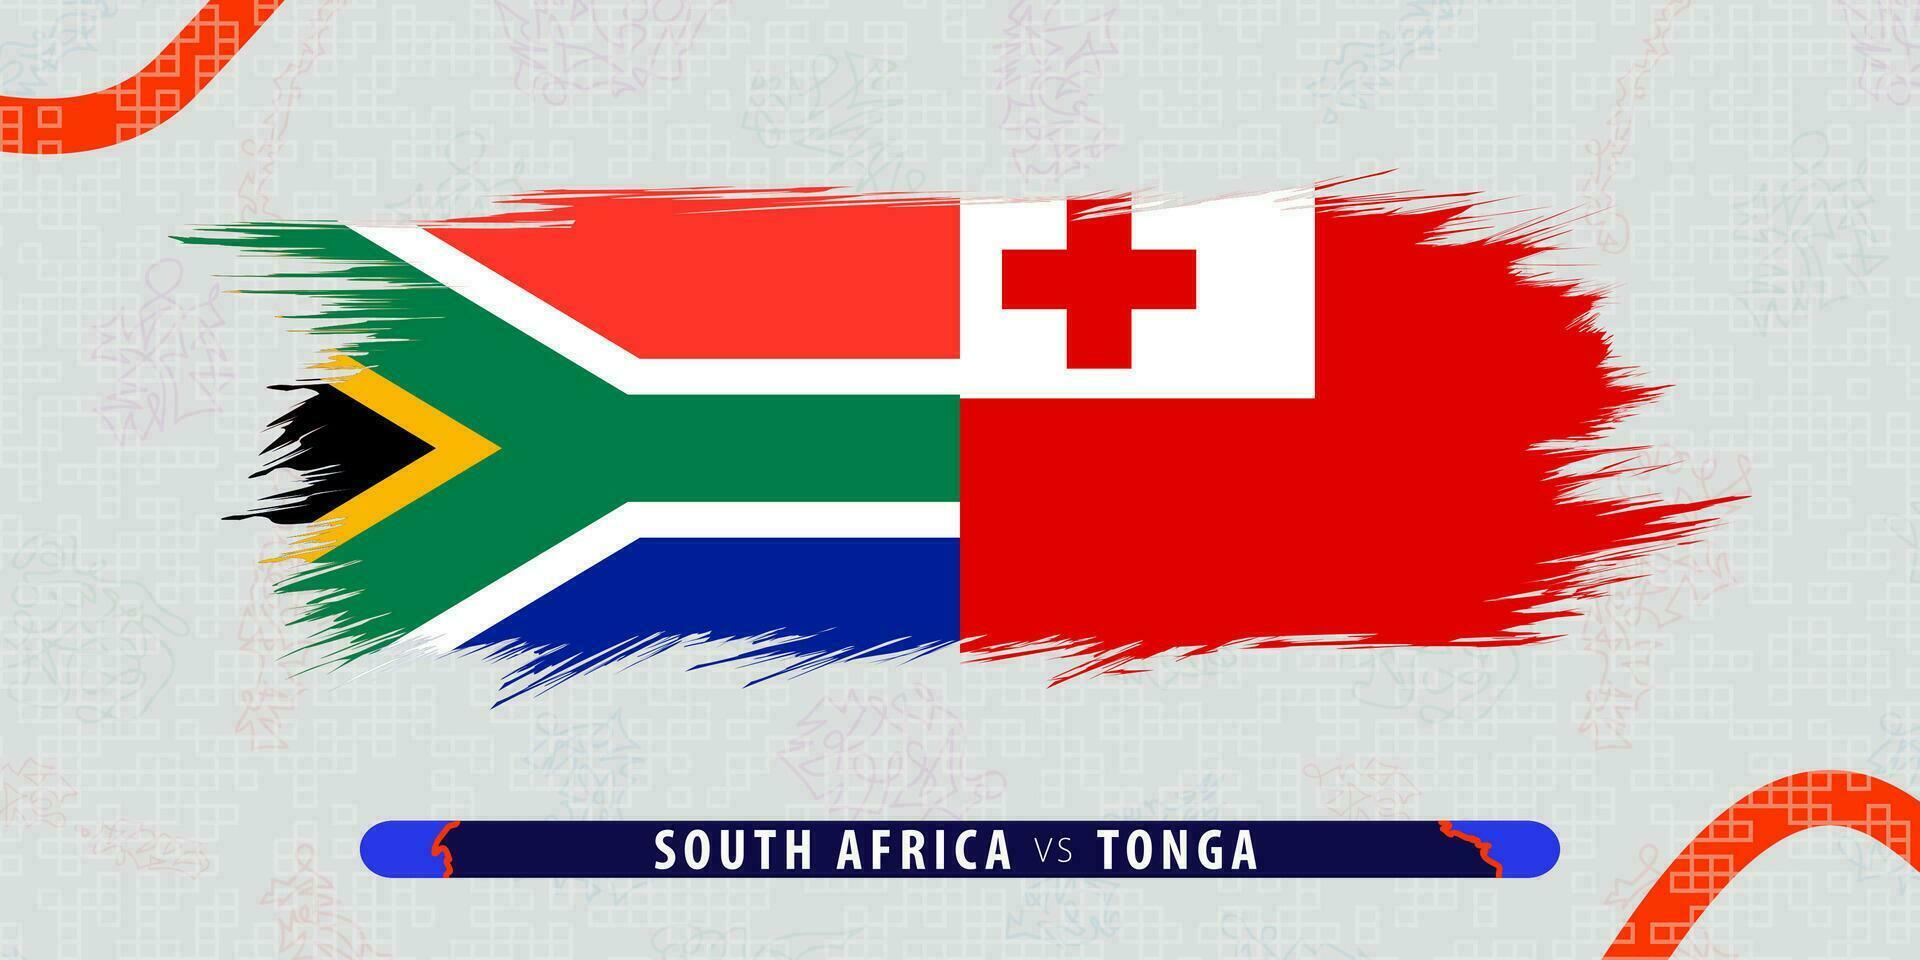 South Africa vs Tonga, international rugby match illustration in brushstroke style. Abstract grungy icon for rugby match. vector